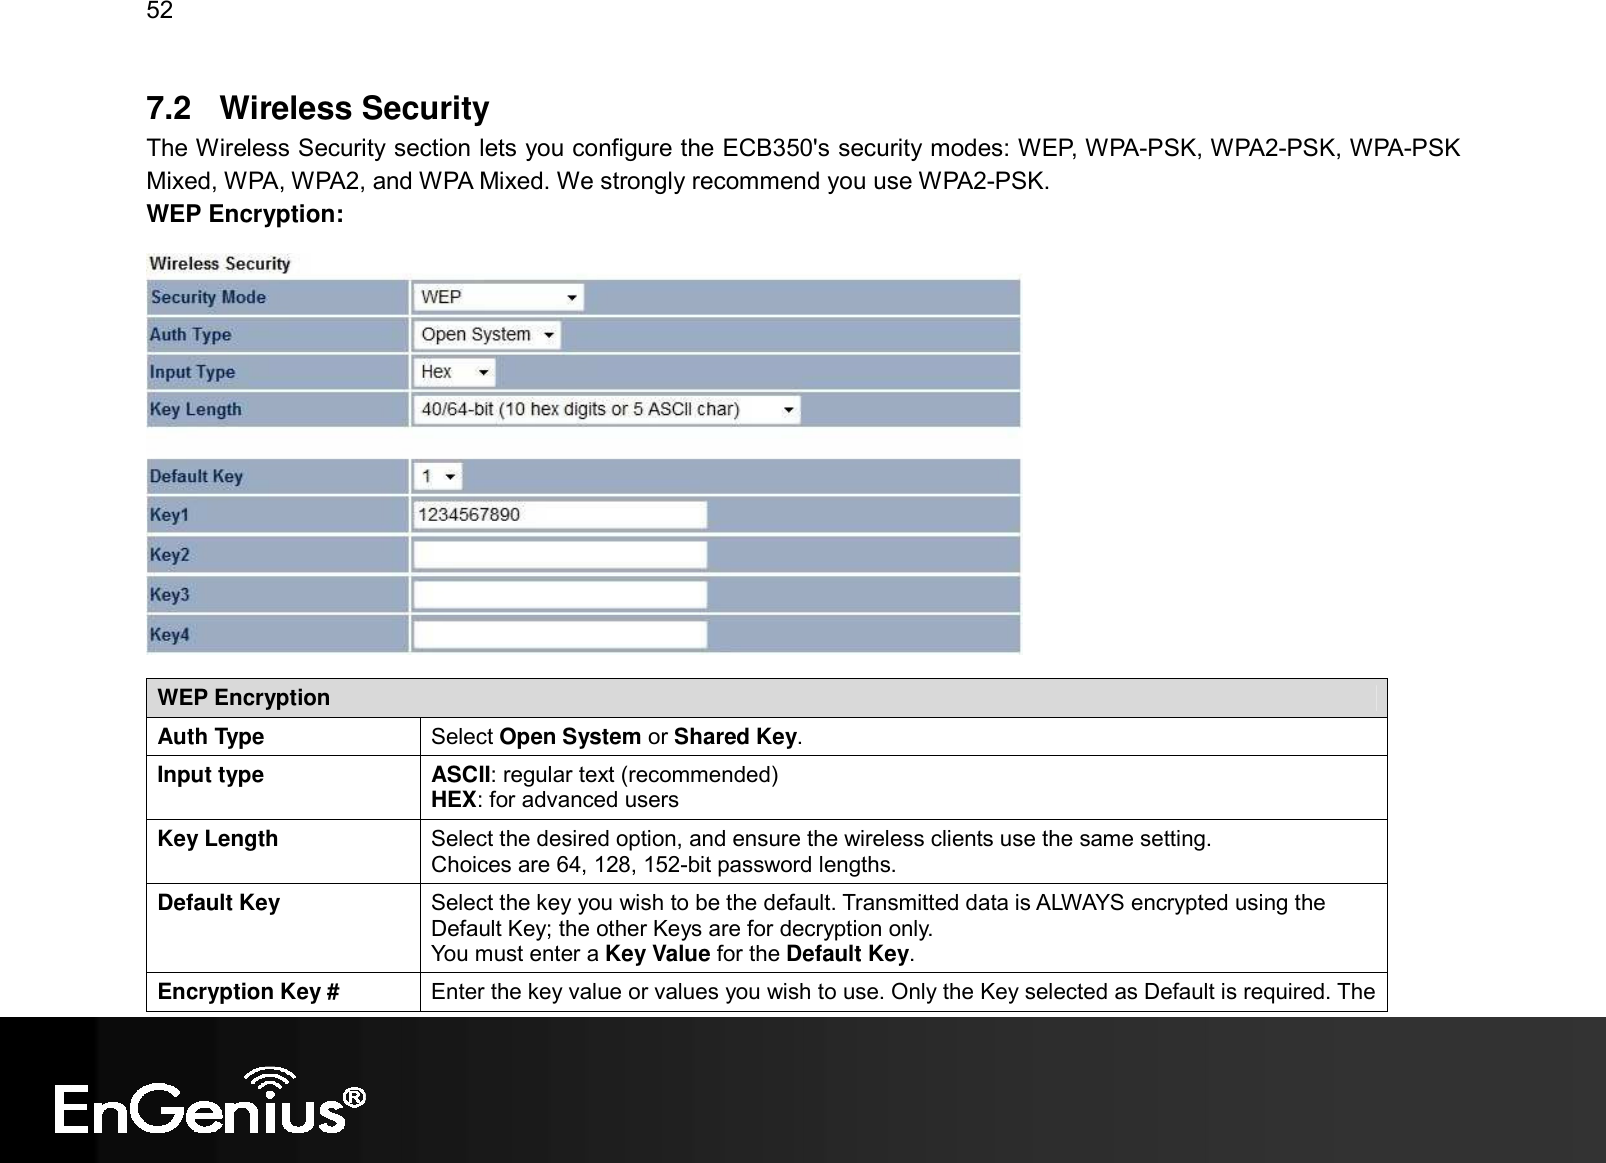 52  7.2  Wireless Security The Wireless Security section lets you configure the ECB350&apos;s security modes: WEP, WPA-PSK, WPA2-PSK, WPA-PSK Mixed, WPA, WPA2, and WPA Mixed. We strongly recommend you use WPA2-PSK.  WEP Encryption:   WEP Encryption Auth Type  Select Open System or Shared Key. Input type  ASCII: regular text (recommended) HEX: for advanced users Key Length  Select the desired option, and ensure the wireless clients use the same setting. Choices are 64, 128, 152-bit password lengths. Default Key  Select the key you wish to be the default. Transmitted data is ALWAYS encrypted using the Default Key; the other Keys are for decryption only.  You must enter a Key Value for the Default Key. Encryption Key #  Enter the key value or values you wish to use. Only the Key selected as Default is required. The 